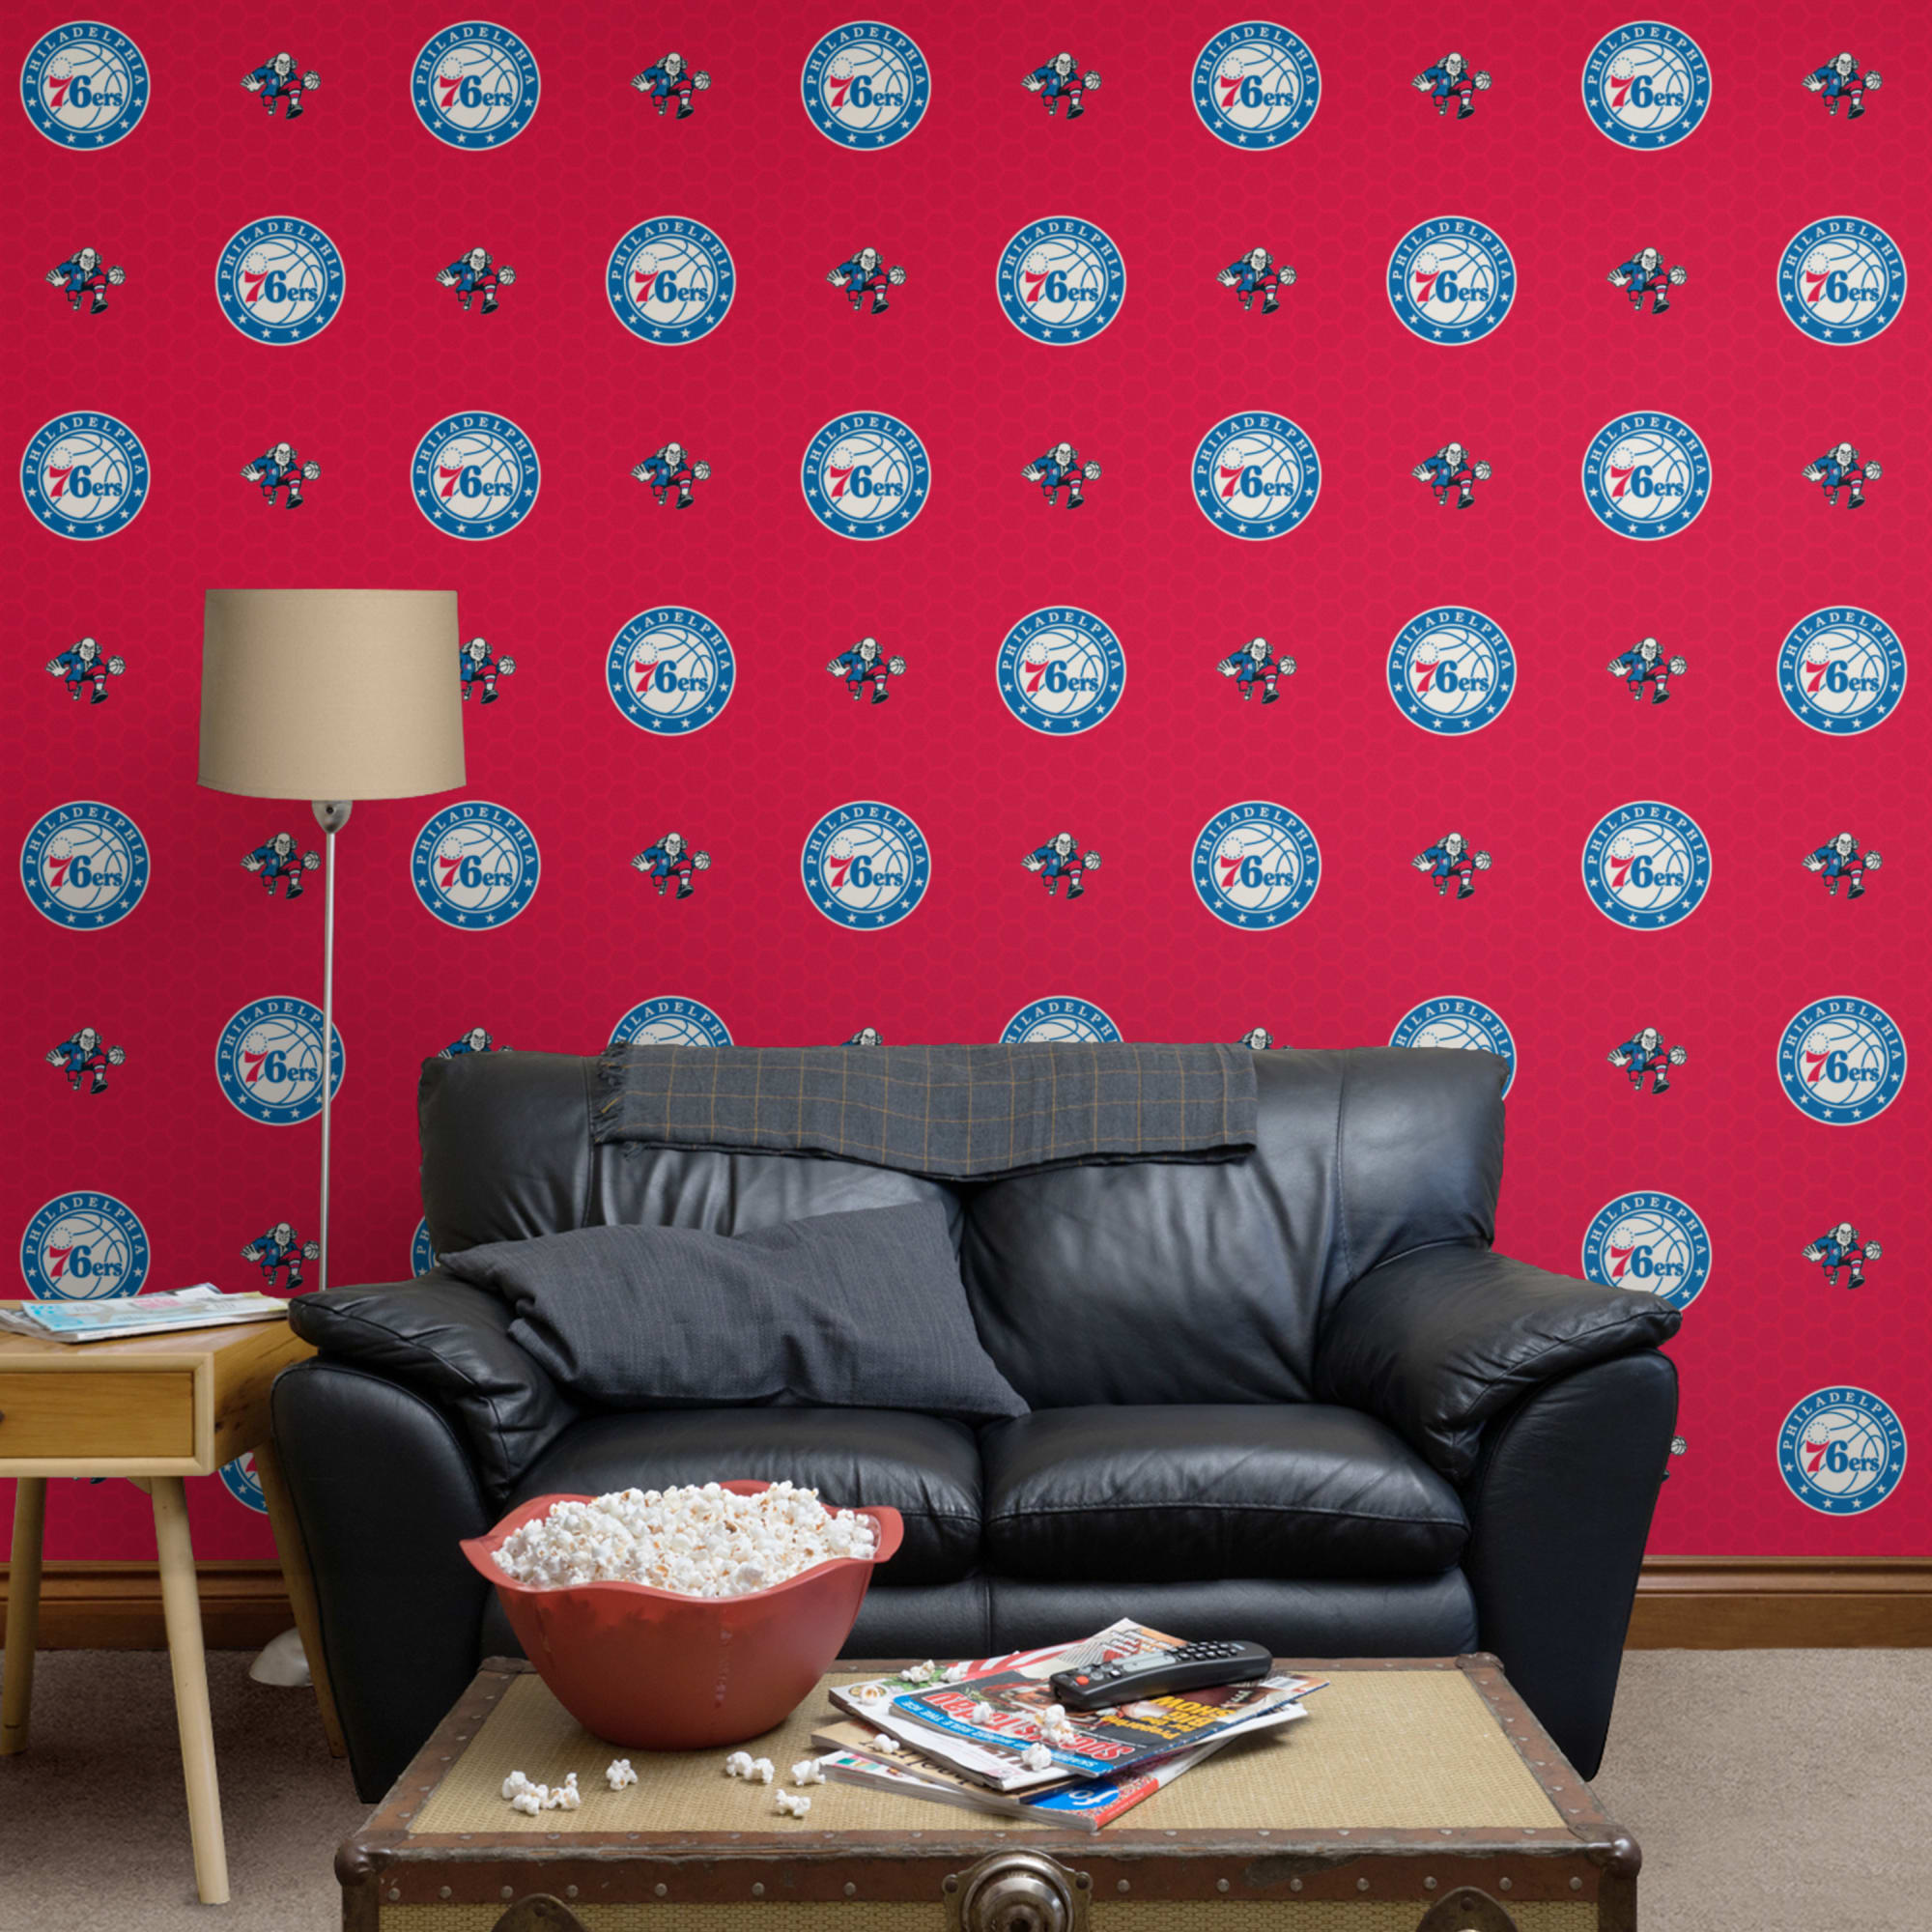 Philadelphia 76ers: Logo Pattern - Officially Licensed Removable Wallpaper 12" x 12" Sample by Fathead | 100% Vinyl